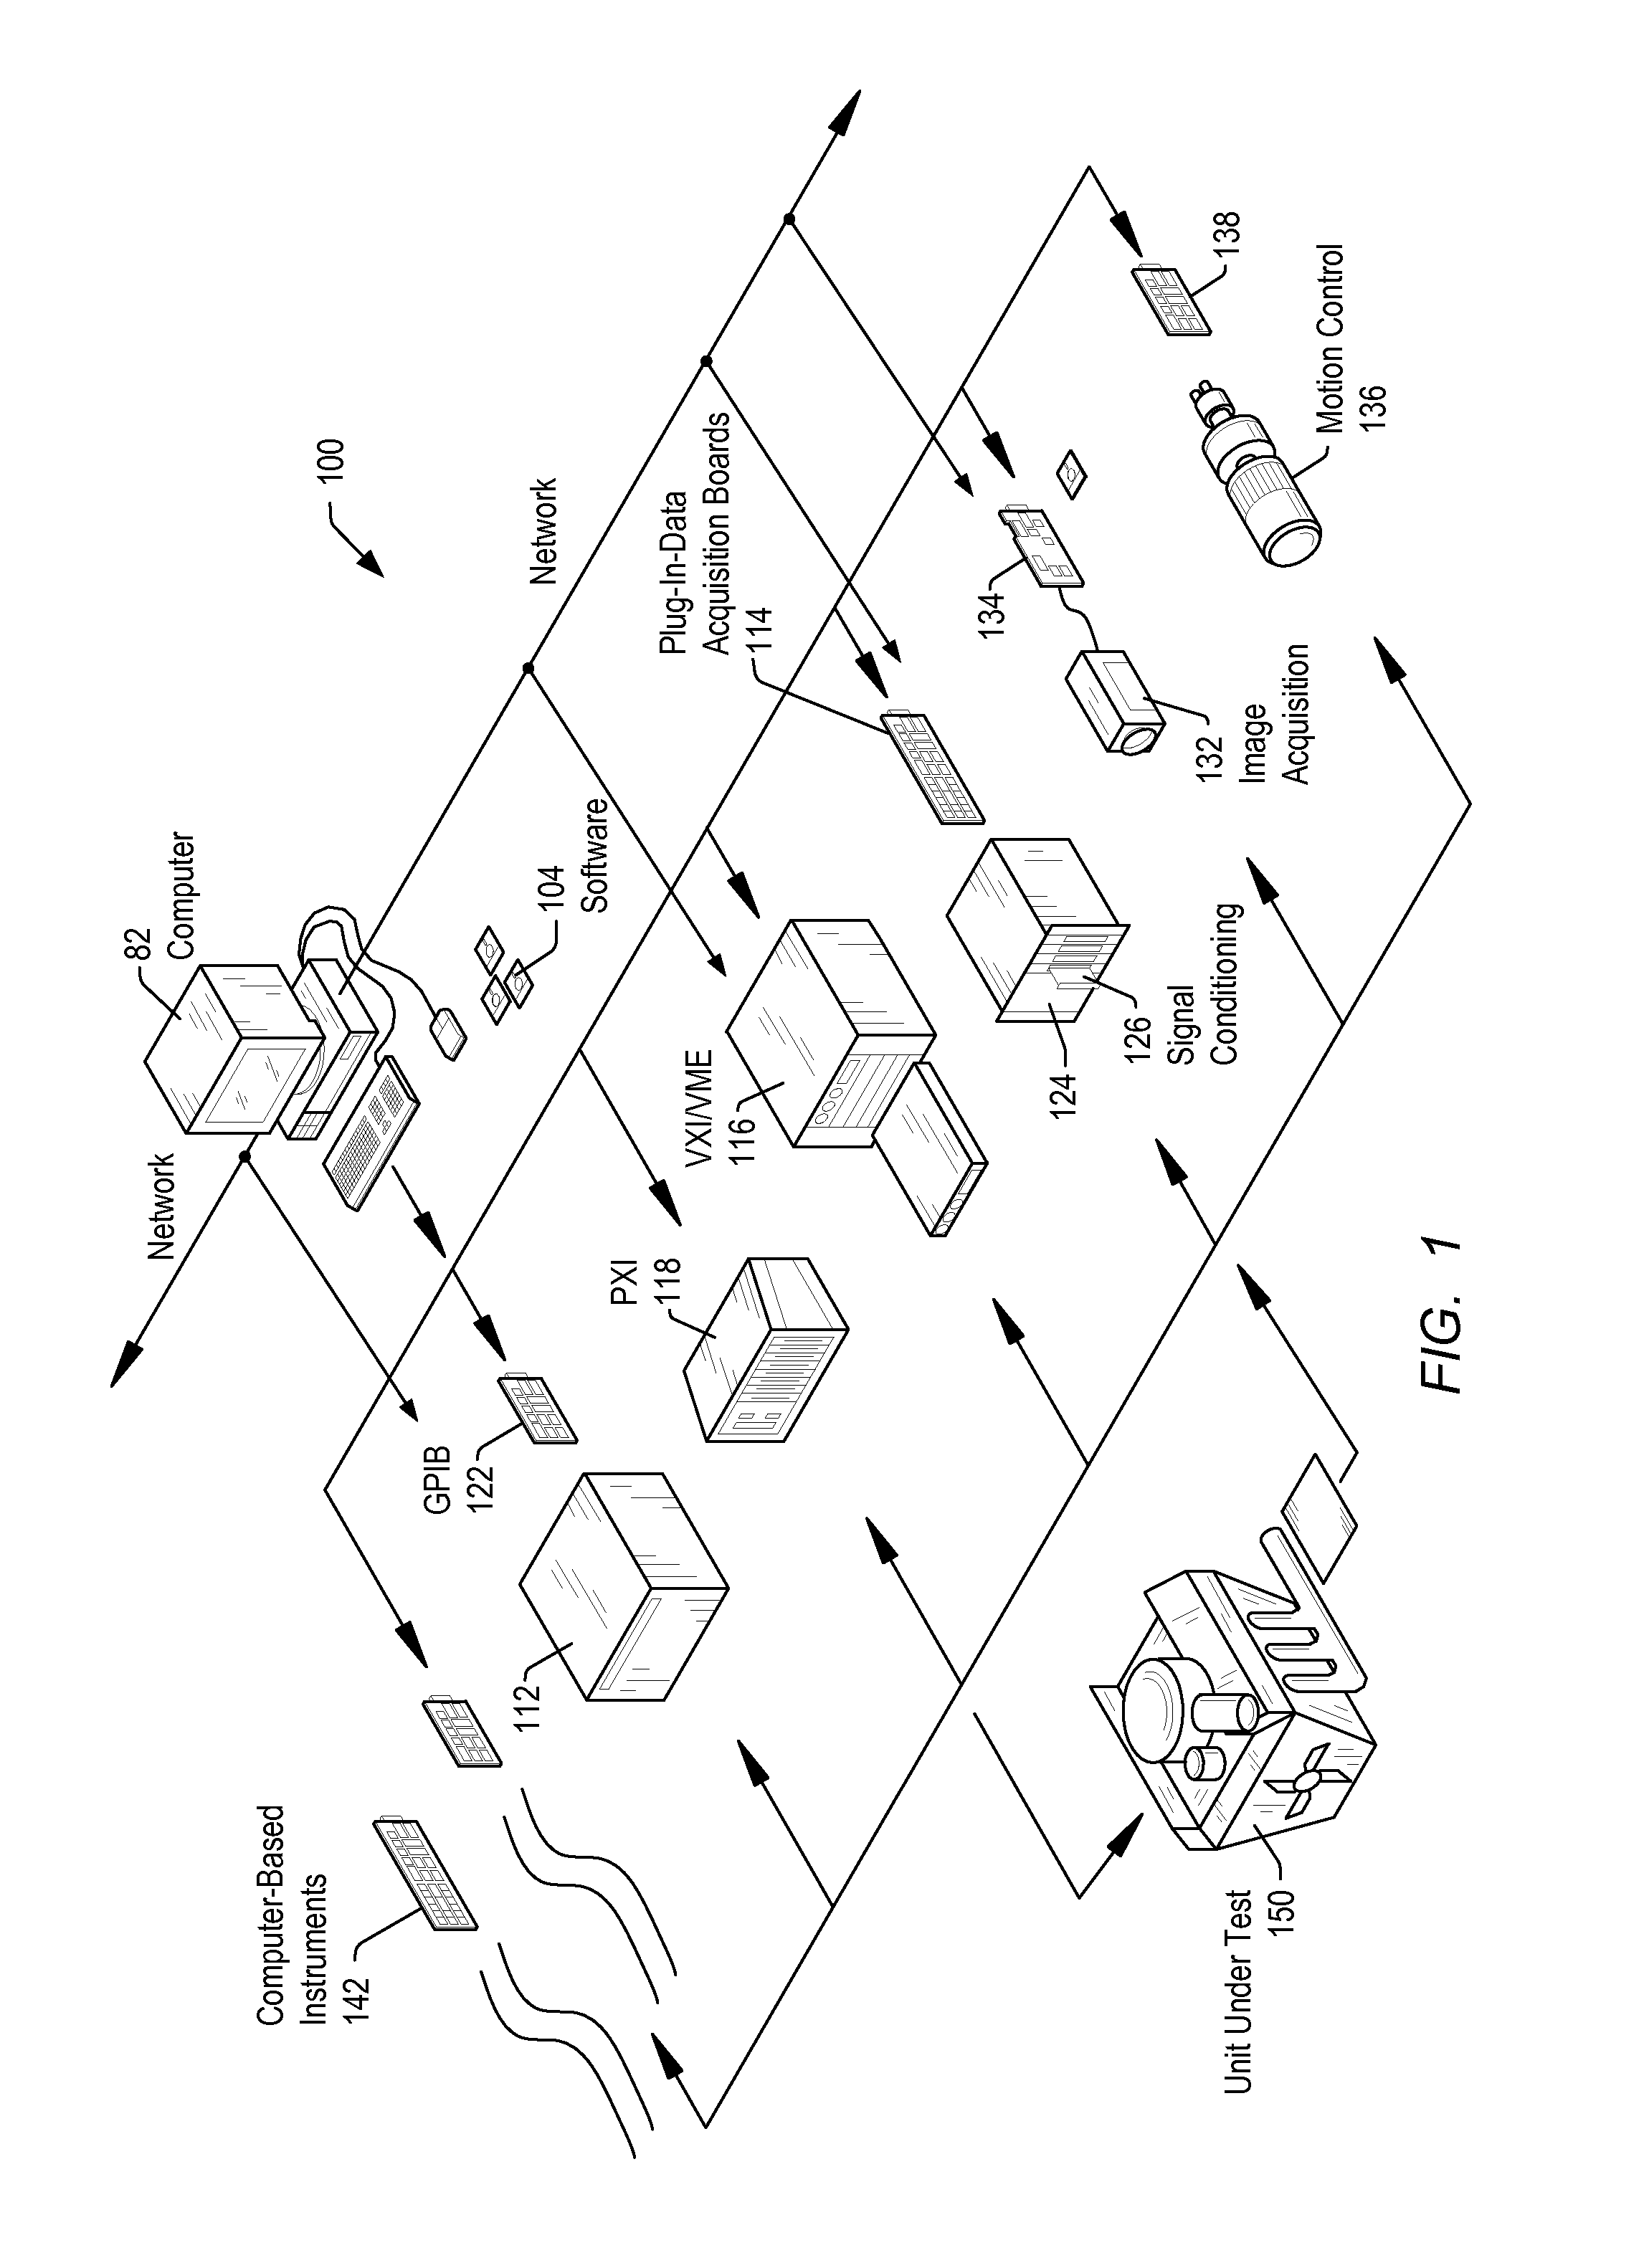 Selectively transparent bridge for peripheral component interconnect express bus systems